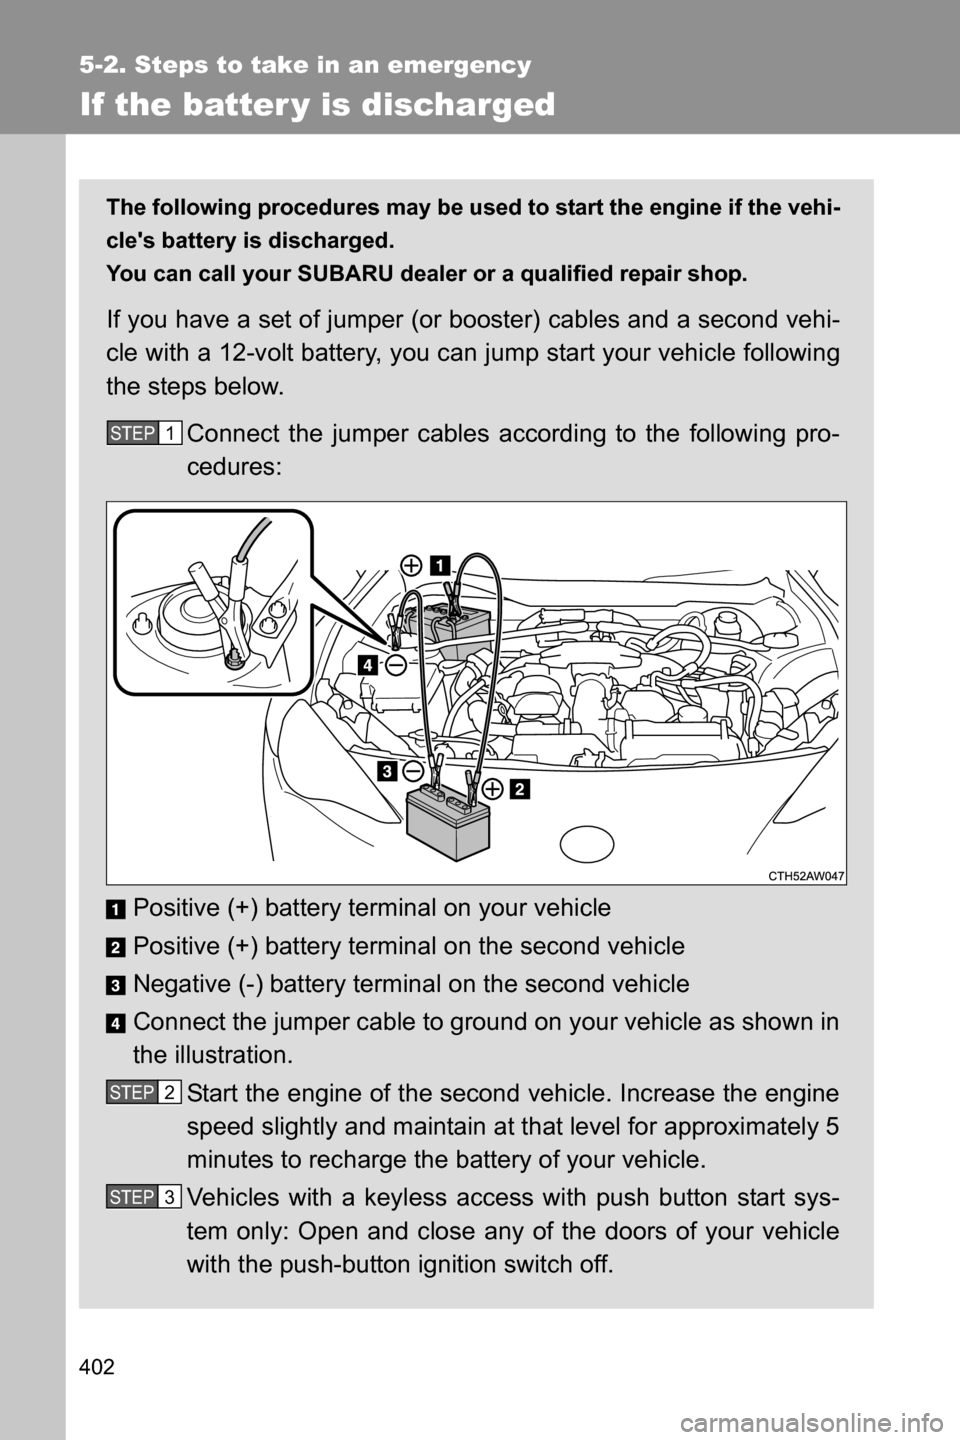 SUBARU BRZ 2016 1.G Owners Manual 402
5-2. Steps to take in an emergency
If the batter y is discharged
The following procedures may be used to start the engine if the vehi-
cles battery is discharged. 
You can call your SUBARU dealer